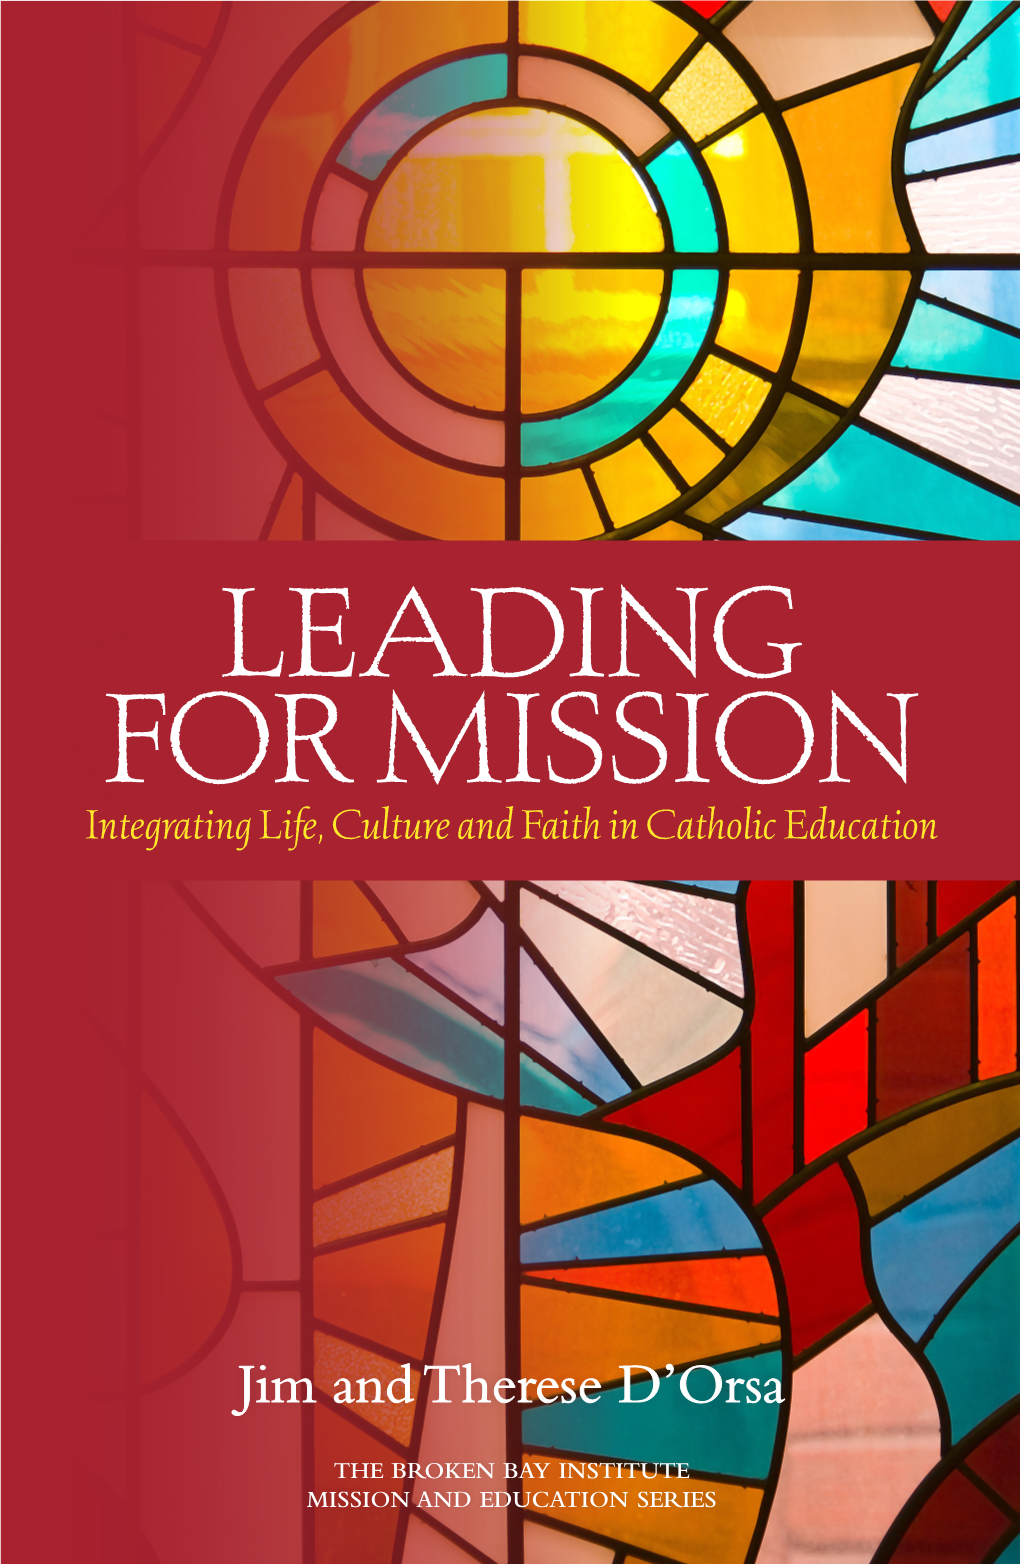 Leading for Mission Leading for Mission: Integrating Life, Culture and Faith ” in Catholic Education Is the Third Volume of the Mission and Education Series